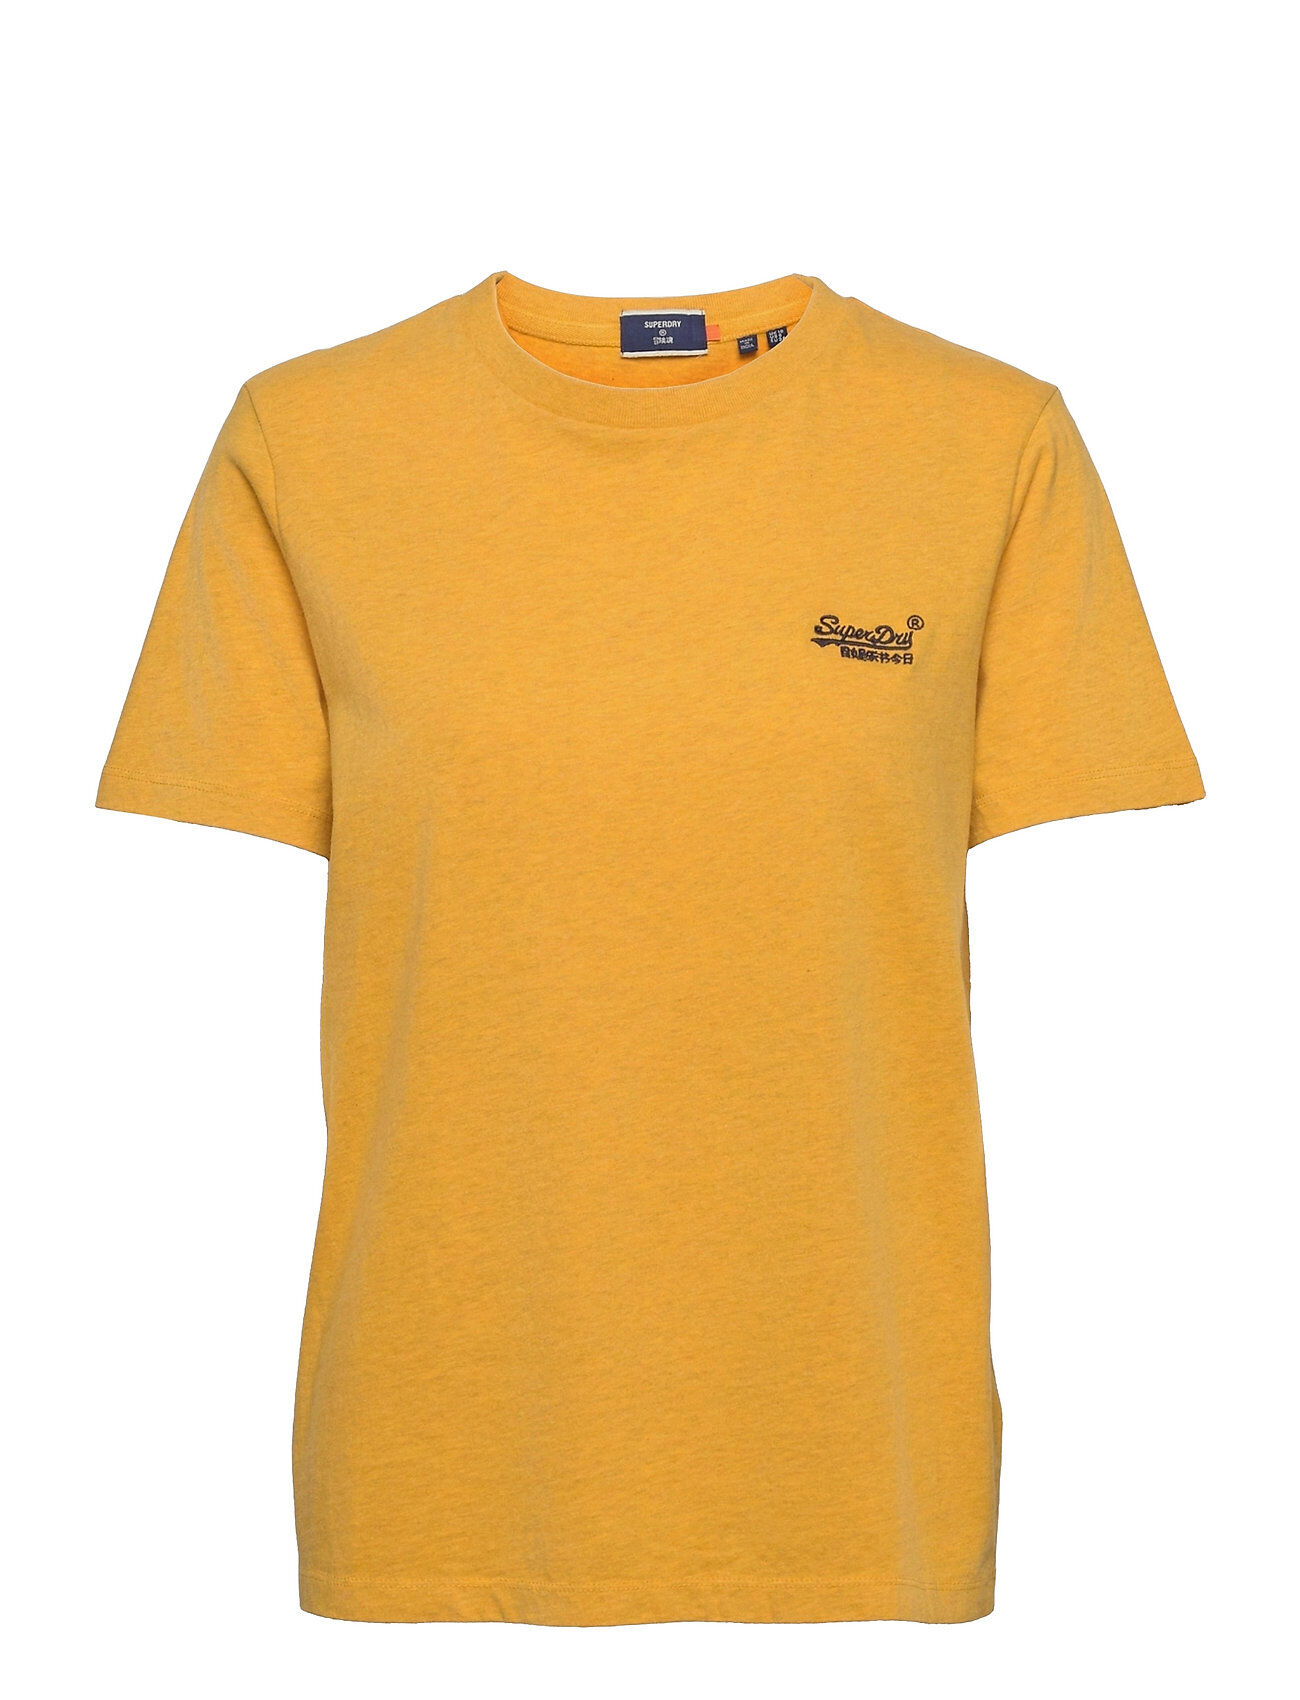 Superdry Ol Classic Tee T-shirts & Tops Short-sleeved Gul Superdry